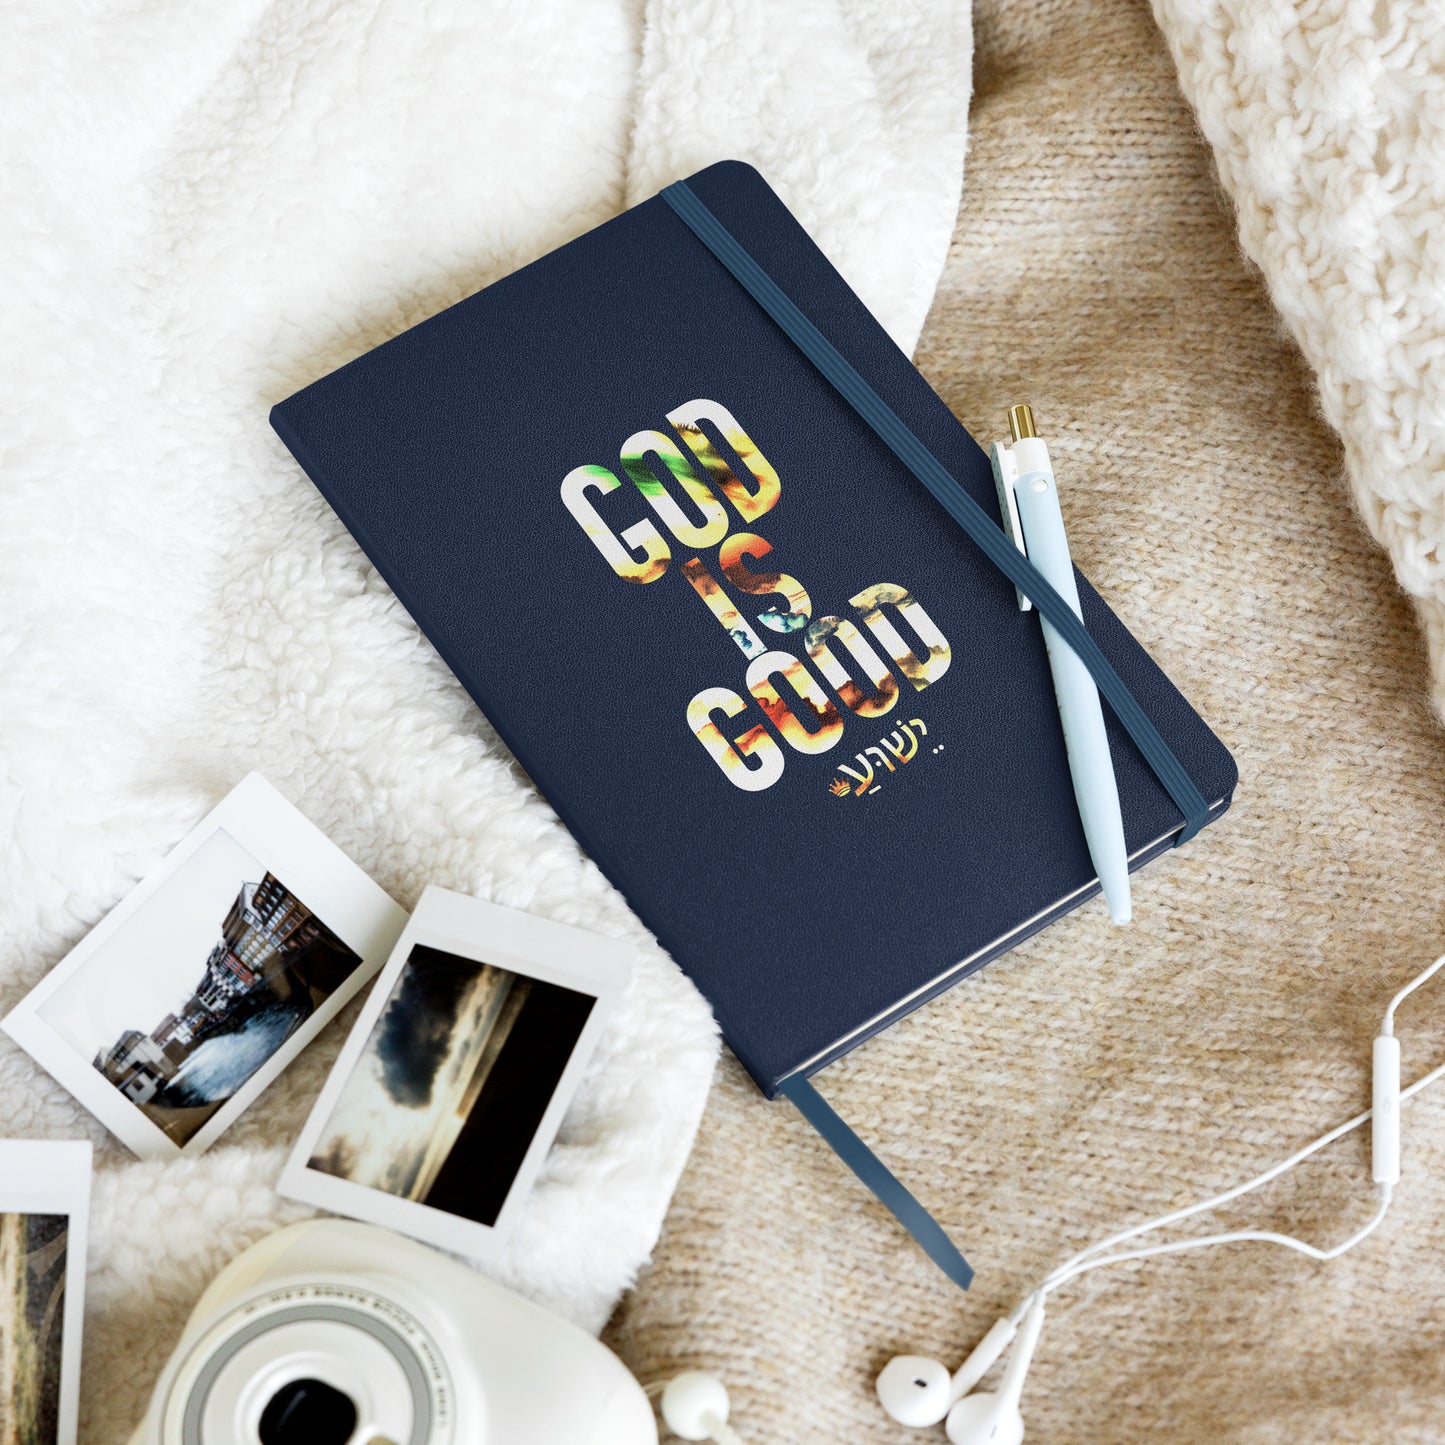 God is Good Hardcover Bound Notebook Journal by Raul Anthony Monge